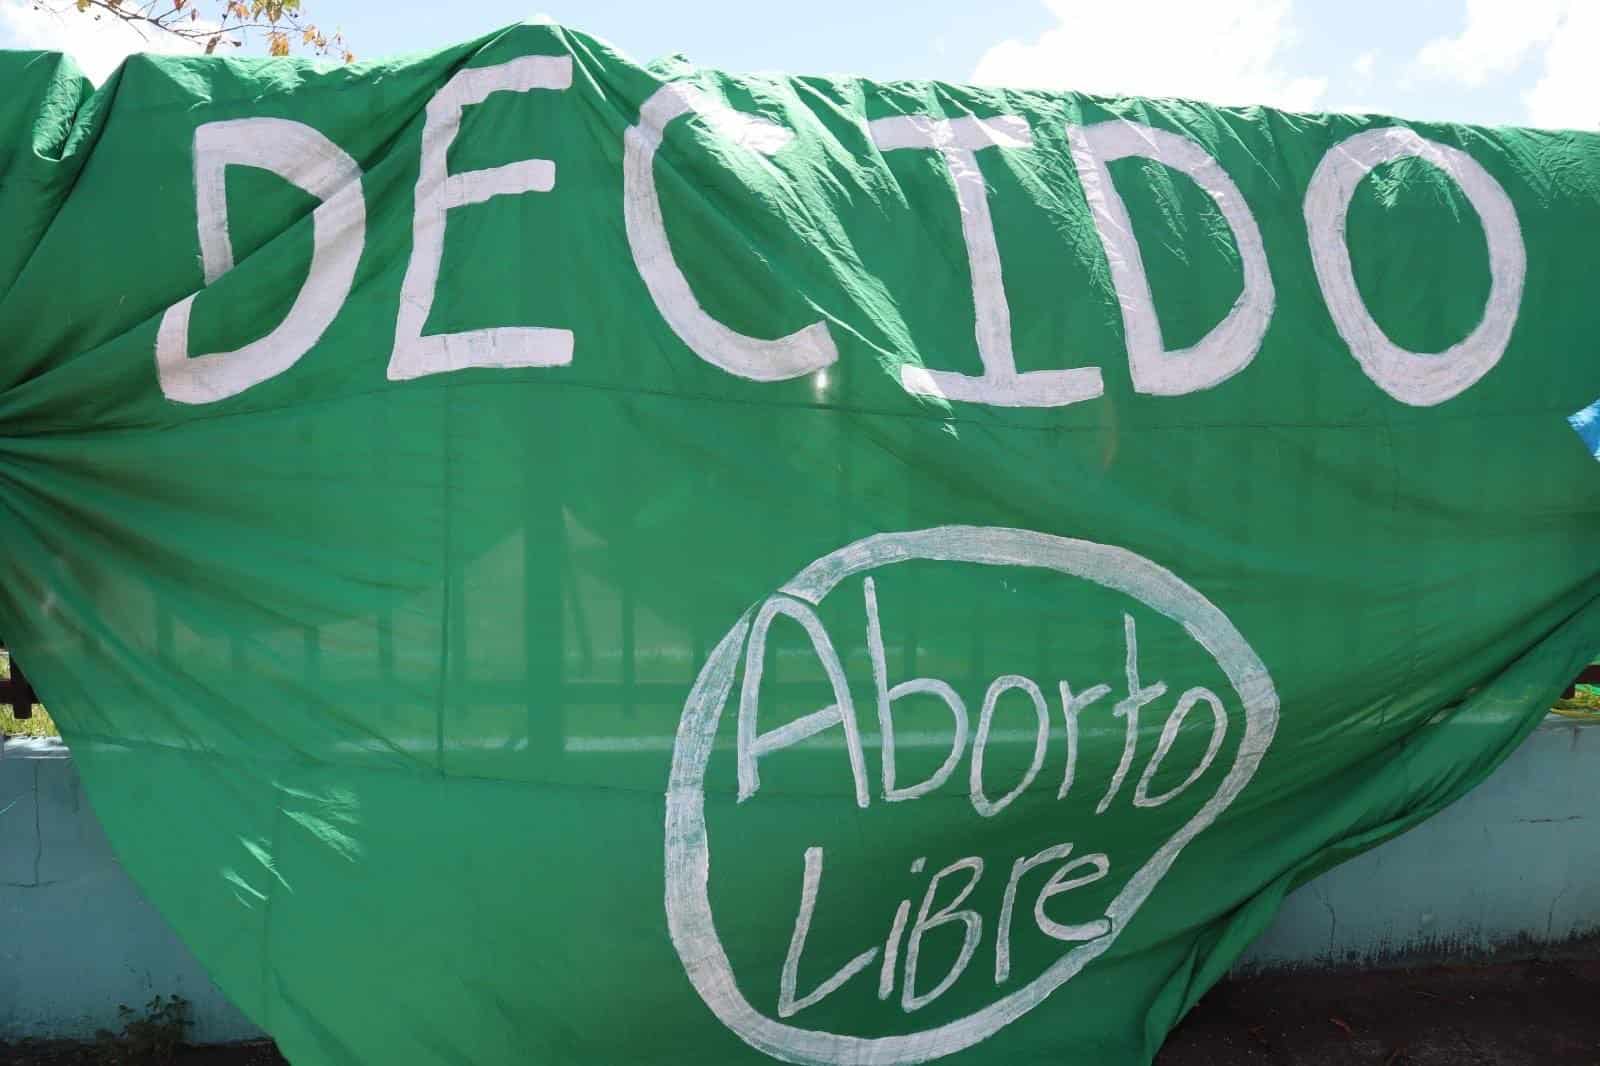 After Roe v. Wade’s repeal, Puerto Rico will need to reexamine its abortion stance